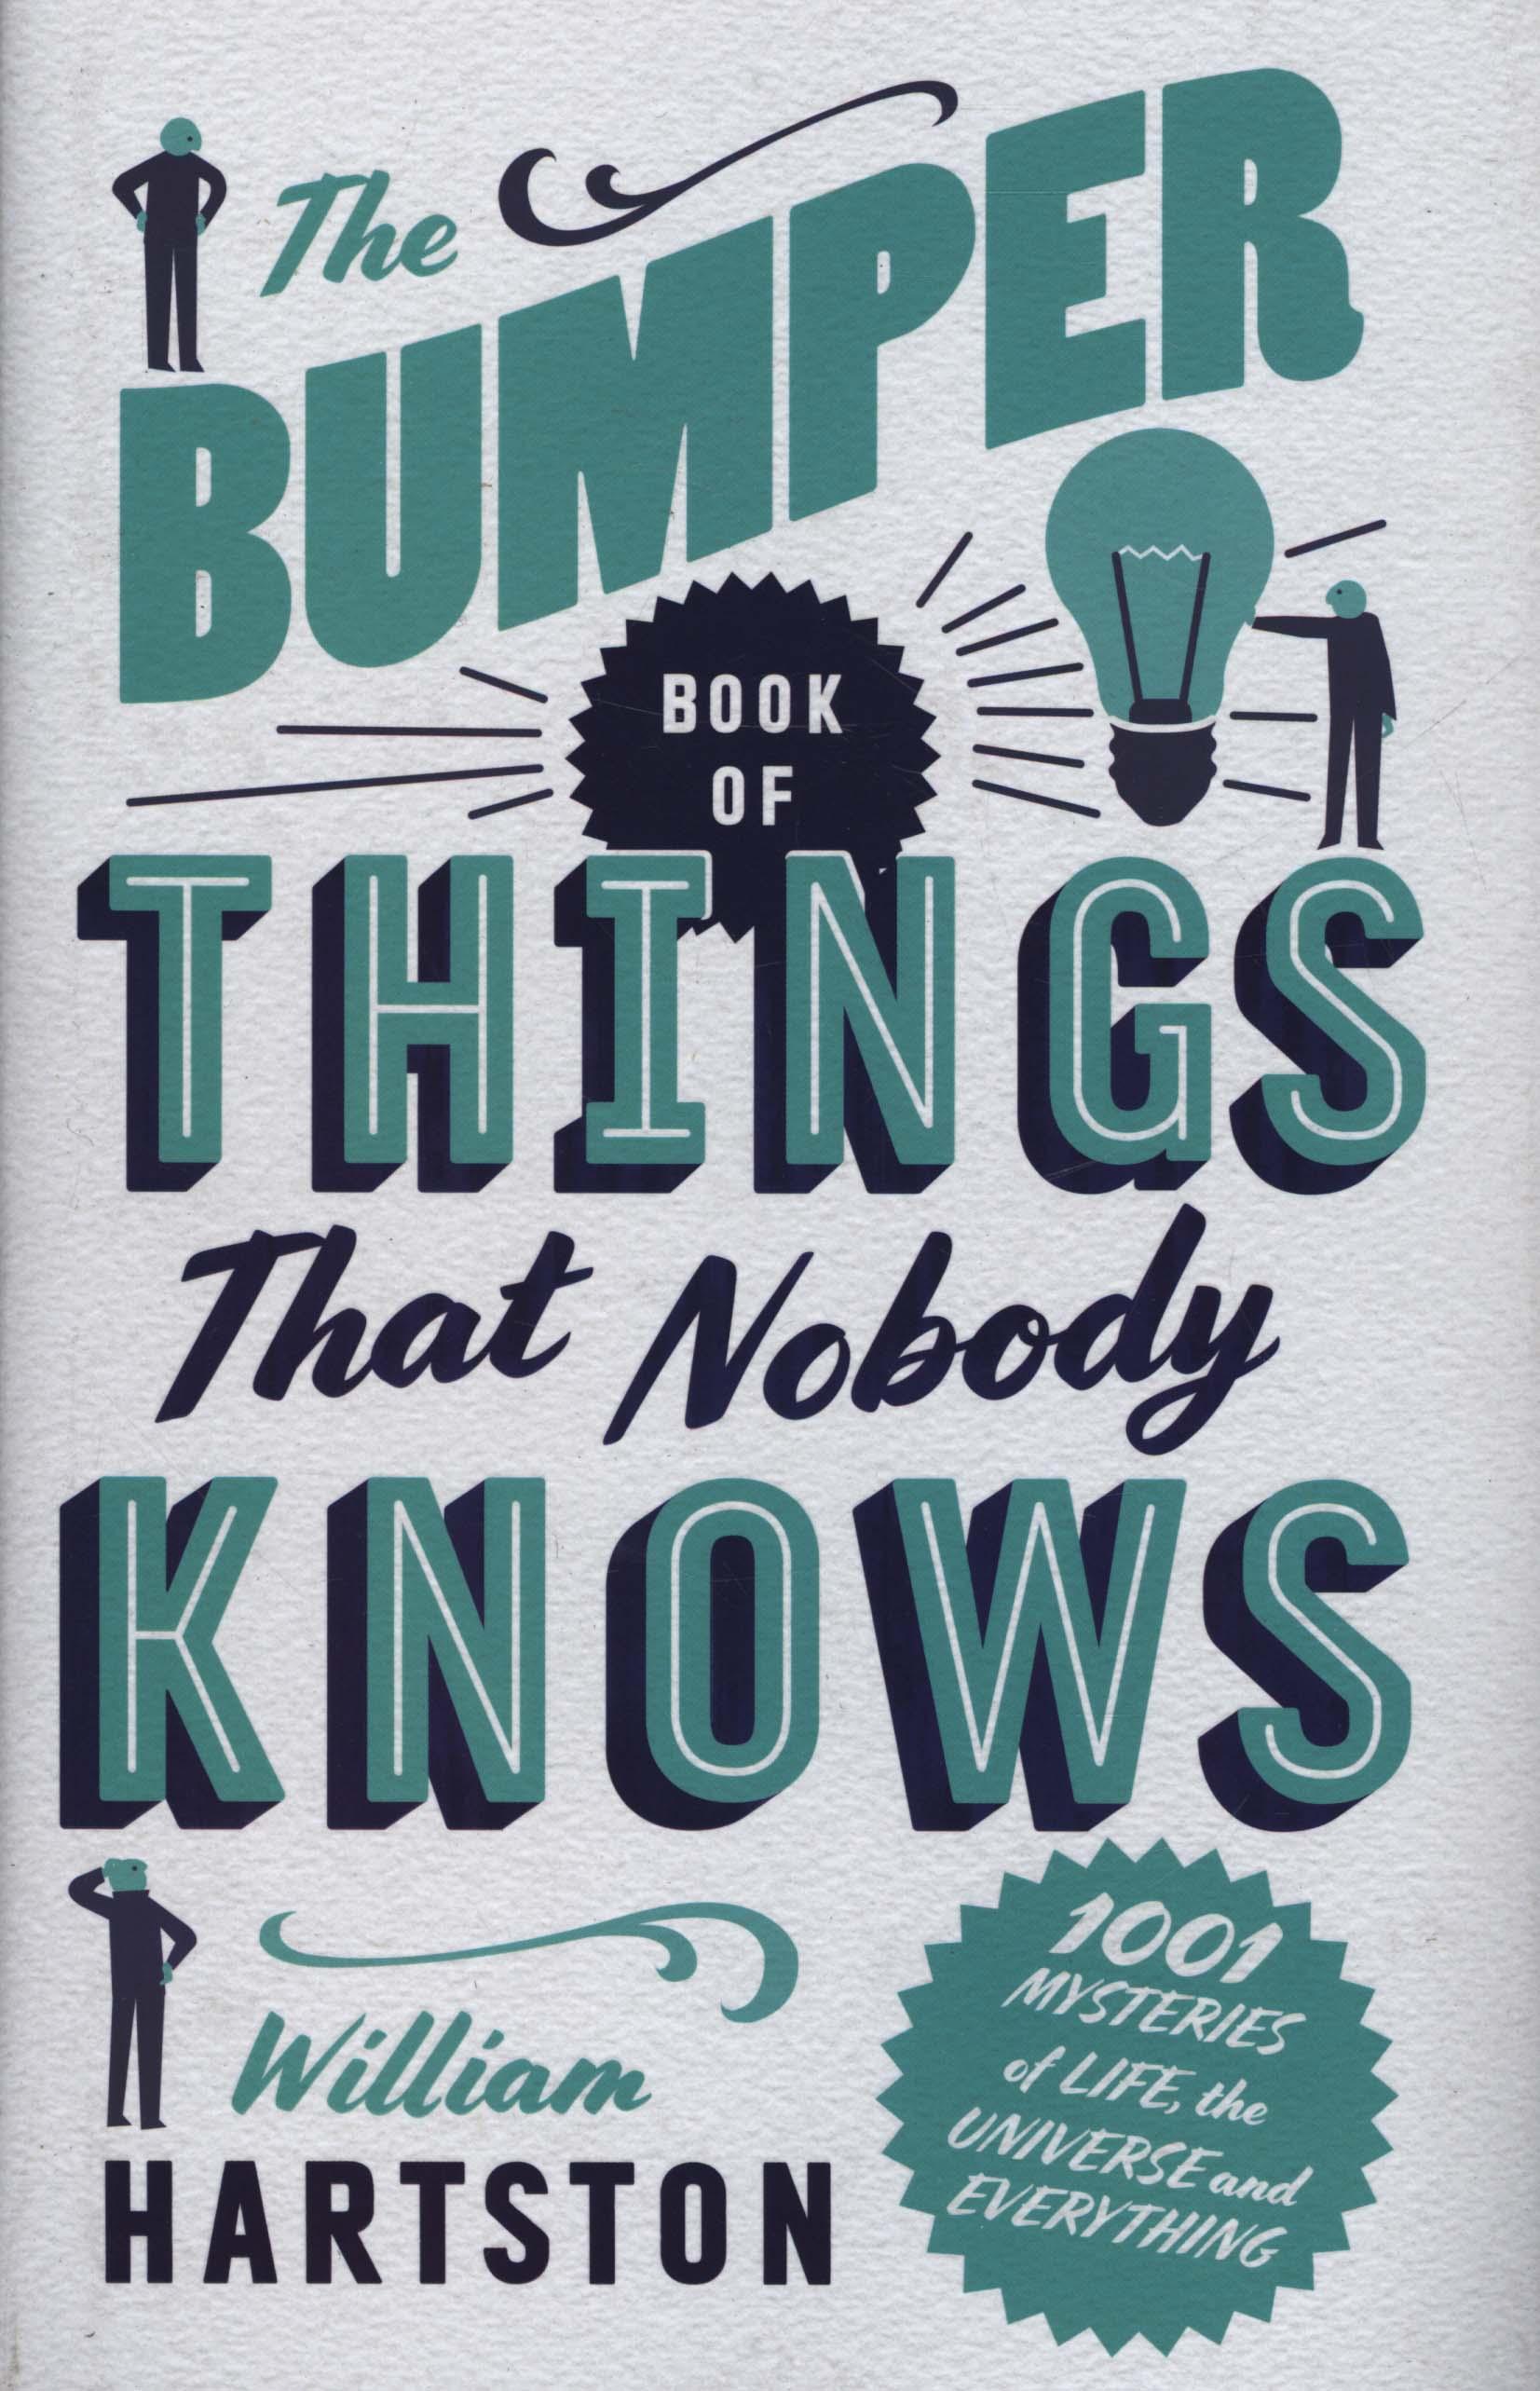 Bumper Book of Things That Nobody Knows - William Hartston